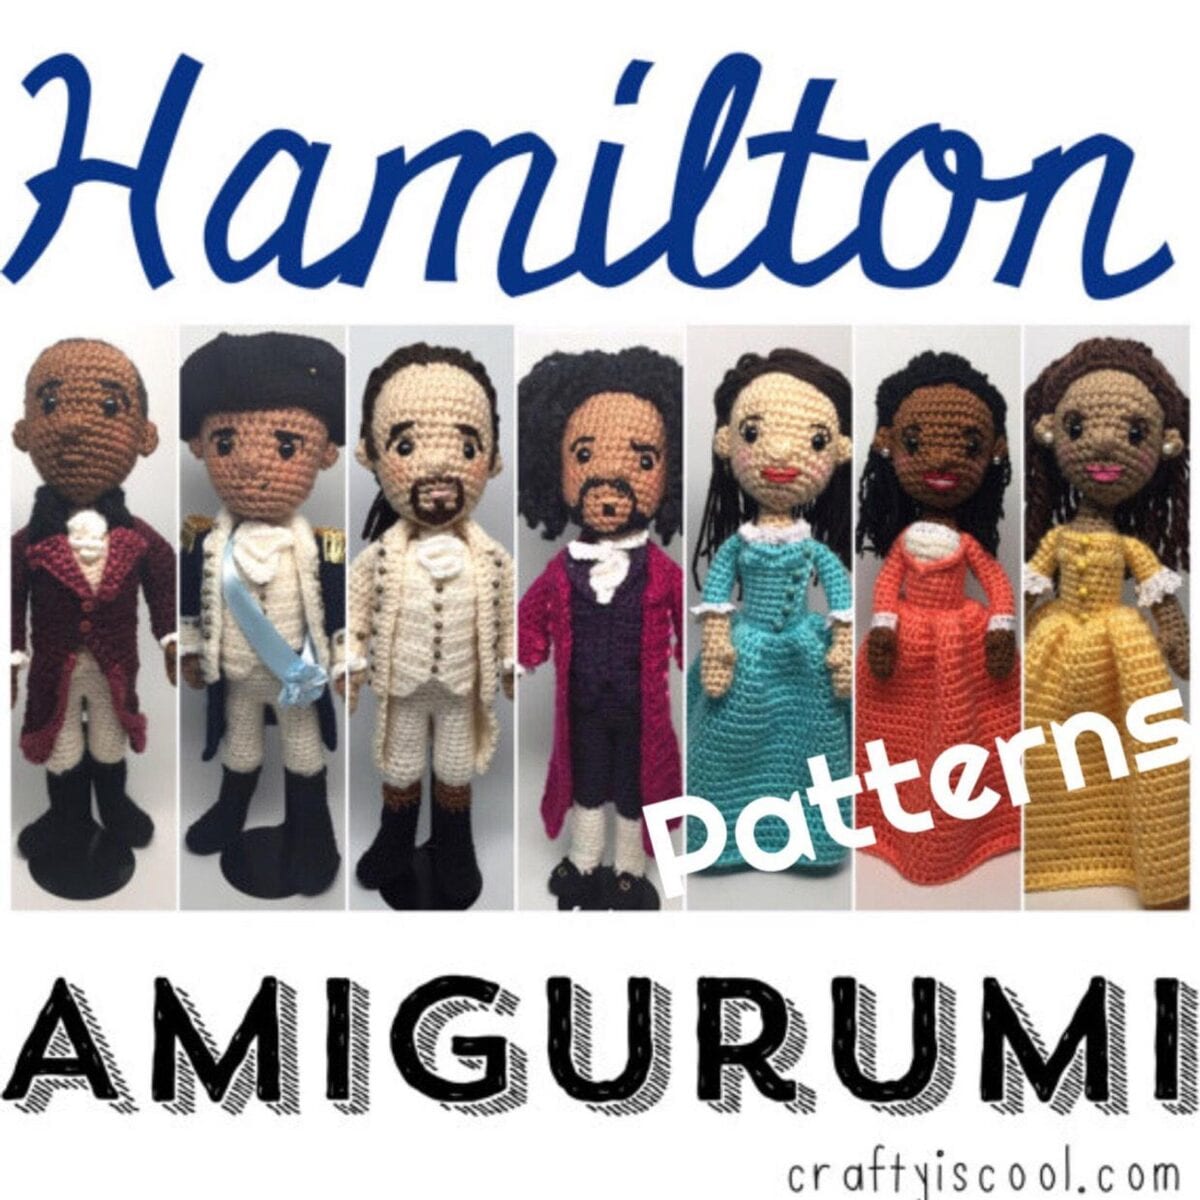 These Patterns Allow You To Crochet The Entire Cast of Hamilton